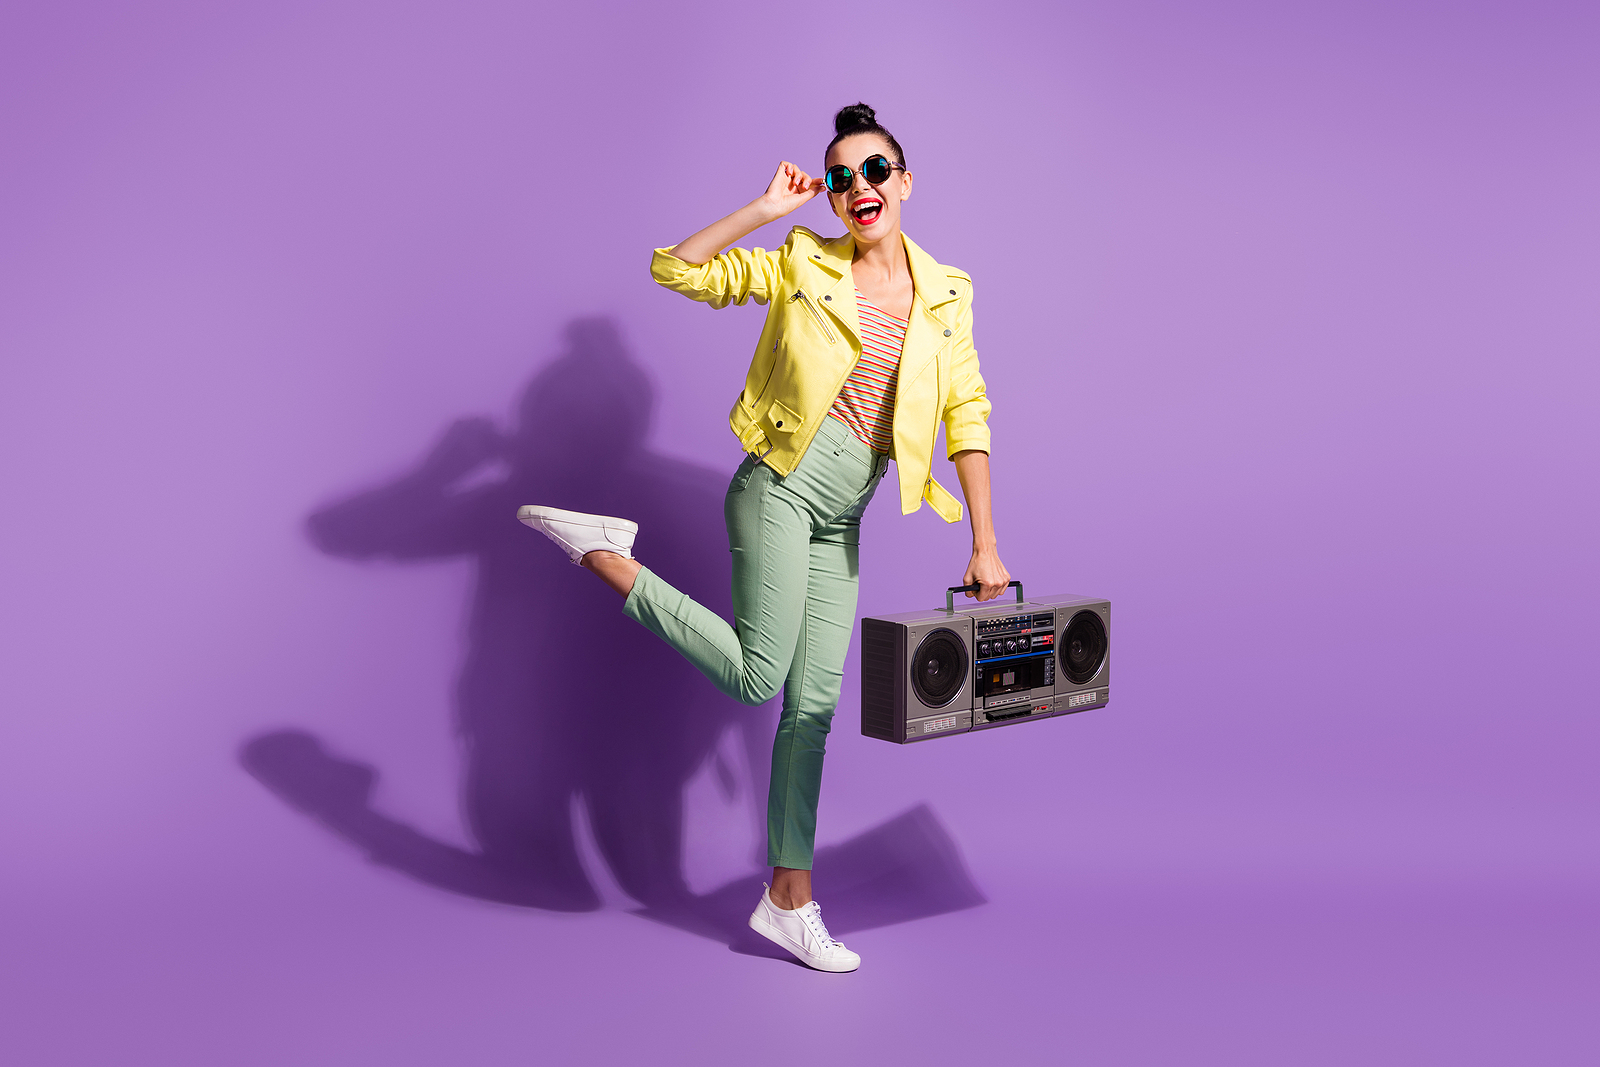 A cheerful woman with sunglasses poses with a boombox, smiling and with a leg in the air.